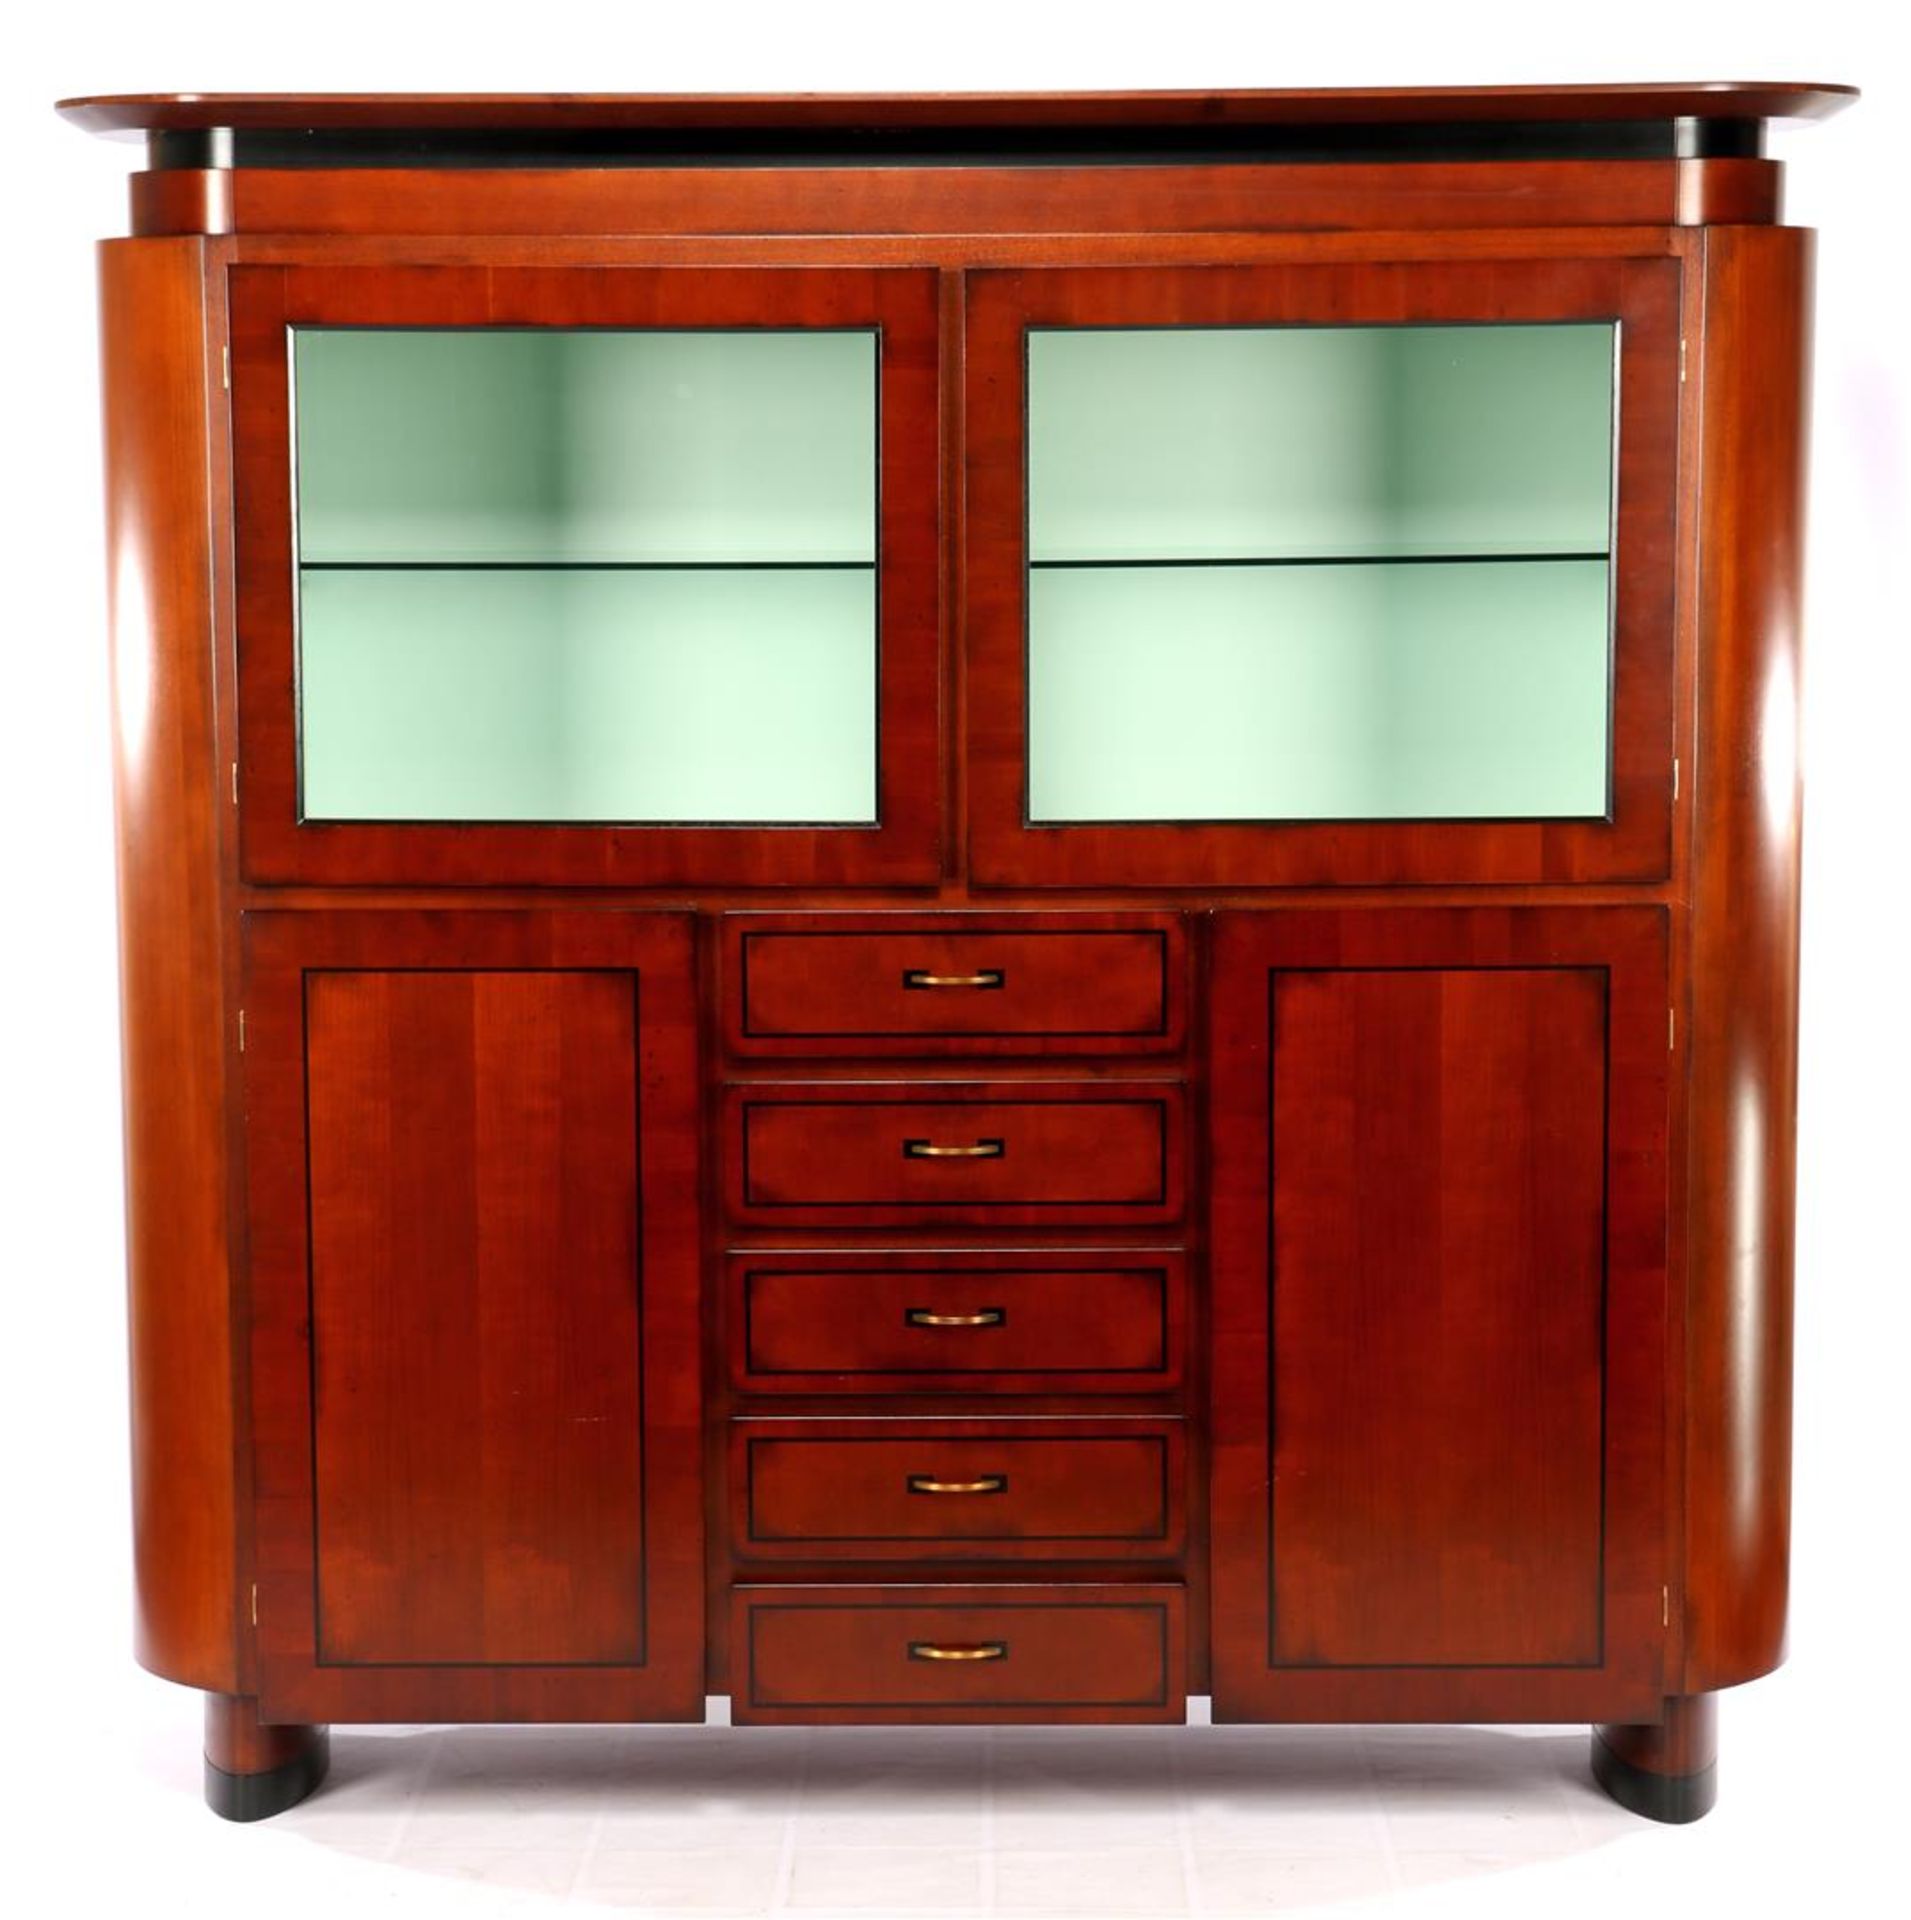 Heldense, oval cupboard with display area with glass shelves, 2 doors, 5 drawers and halogen